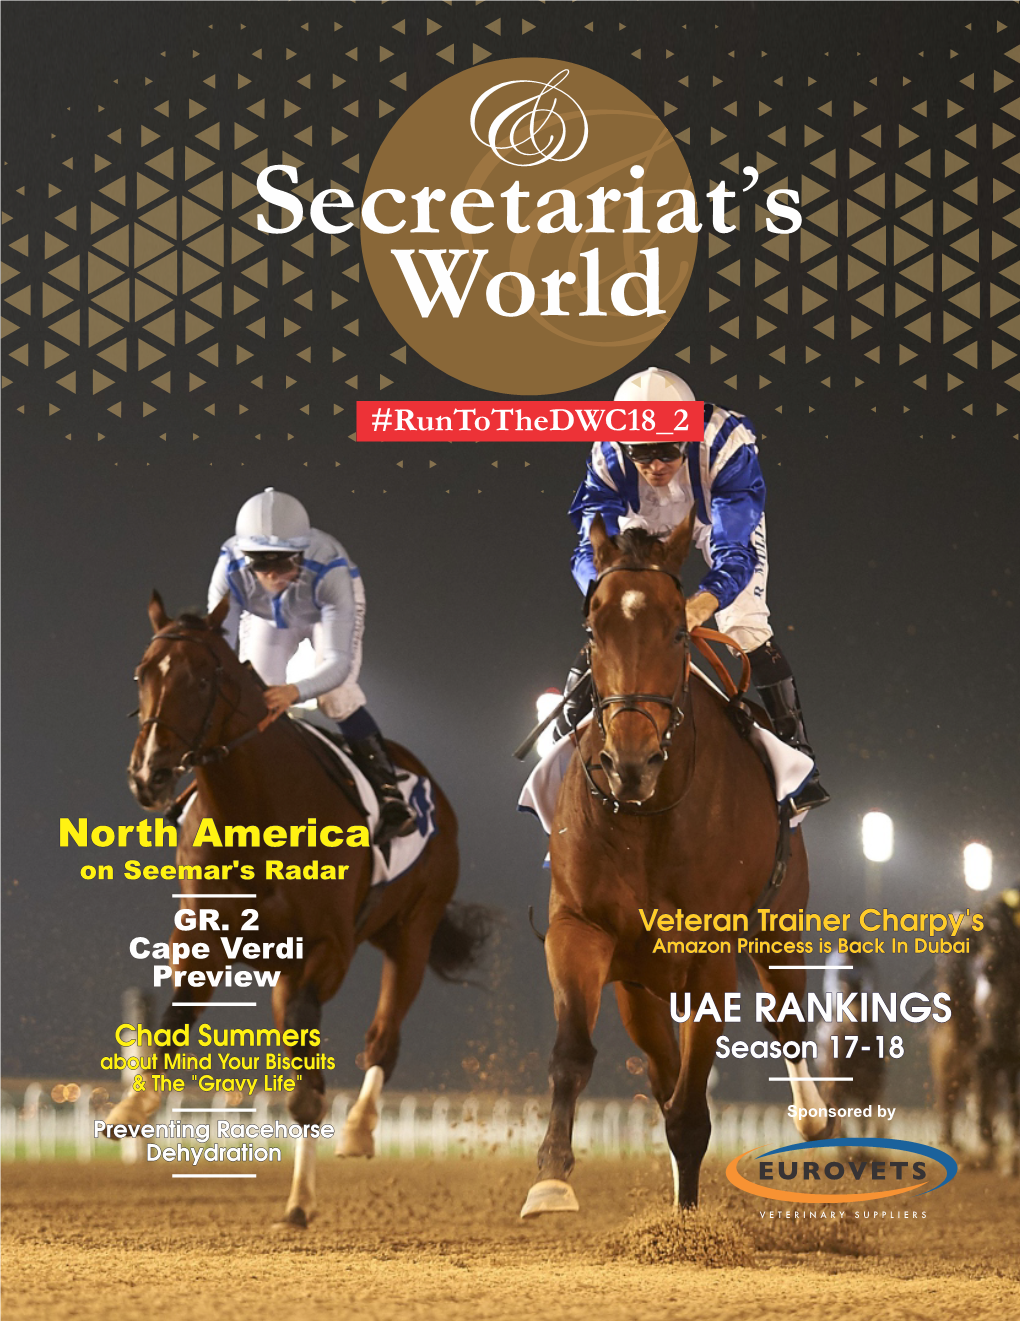 SECRETARIAT's WORLD #Runtothedwc18 2 Publishers Note Welcome to the Second Edition of the #Runtothedwc2018 Series